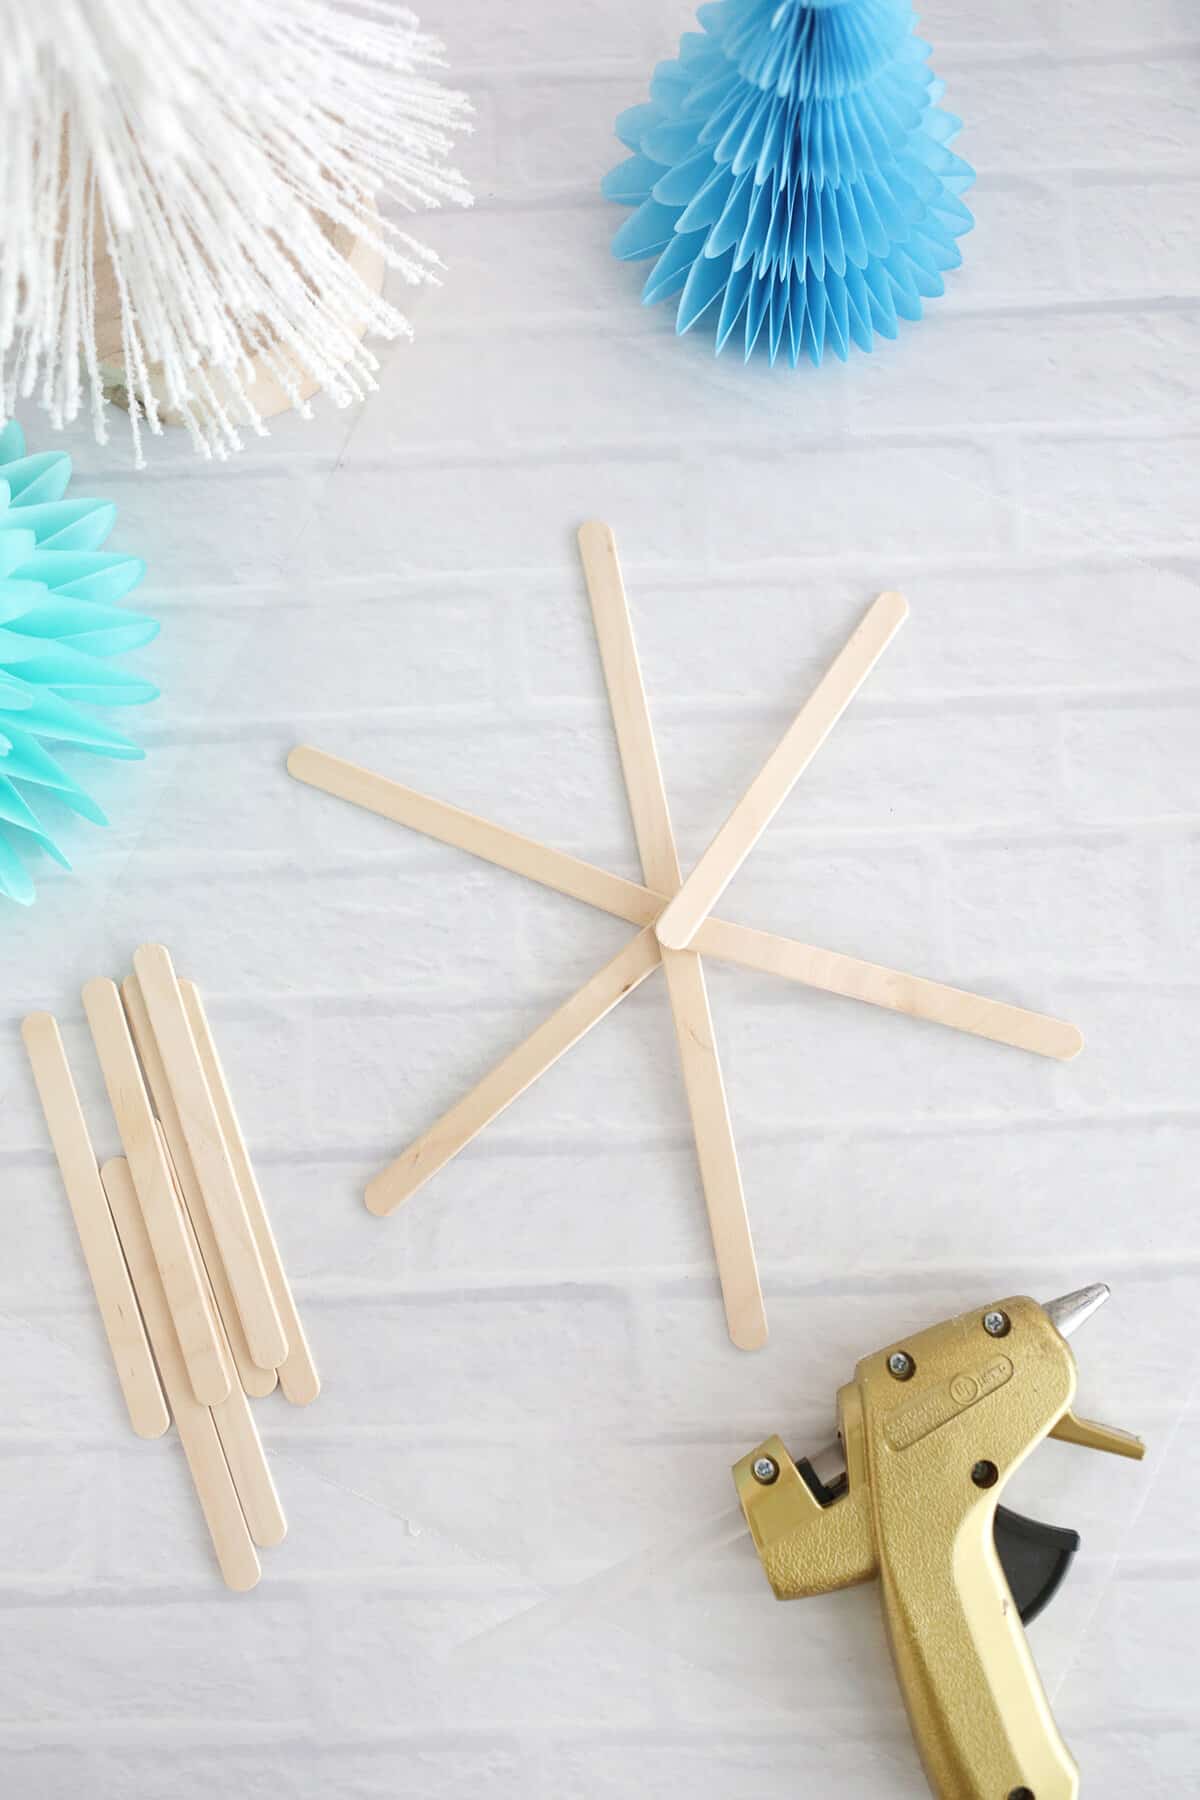 popsicle sticks being made into snowflakes